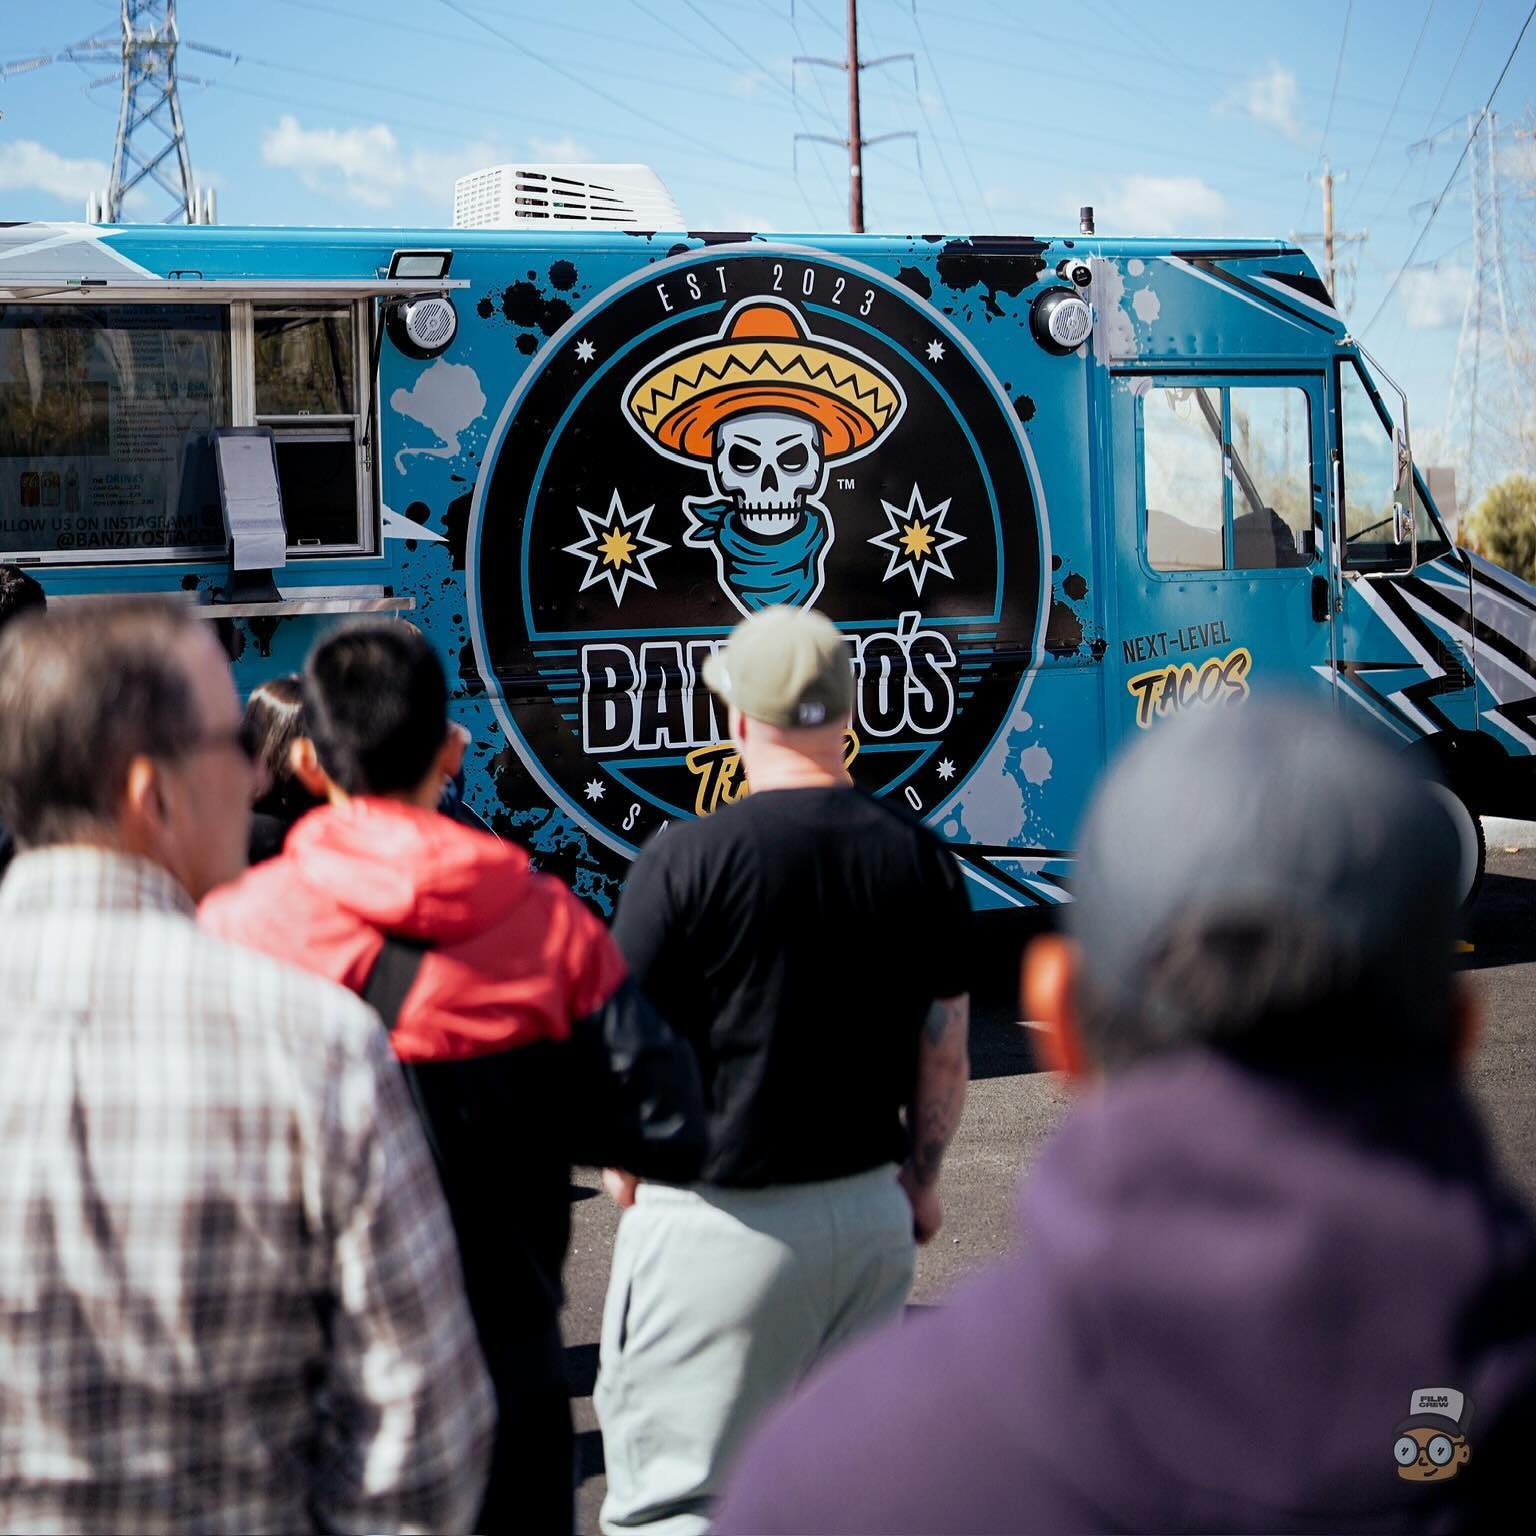 This week&rsquo;s Roseville Location Schedule!

TUESDAY 4/30 AND THURSDAY 5/2! 
(SAT: Private Event)

5pm-8:30pm OR SELLOUT.

1251 Roseville Pkwy, Roseville, CA 95678 
Outside the amazing, new Sharif &amp; CO Building!

See you soon! 💀🌮💥